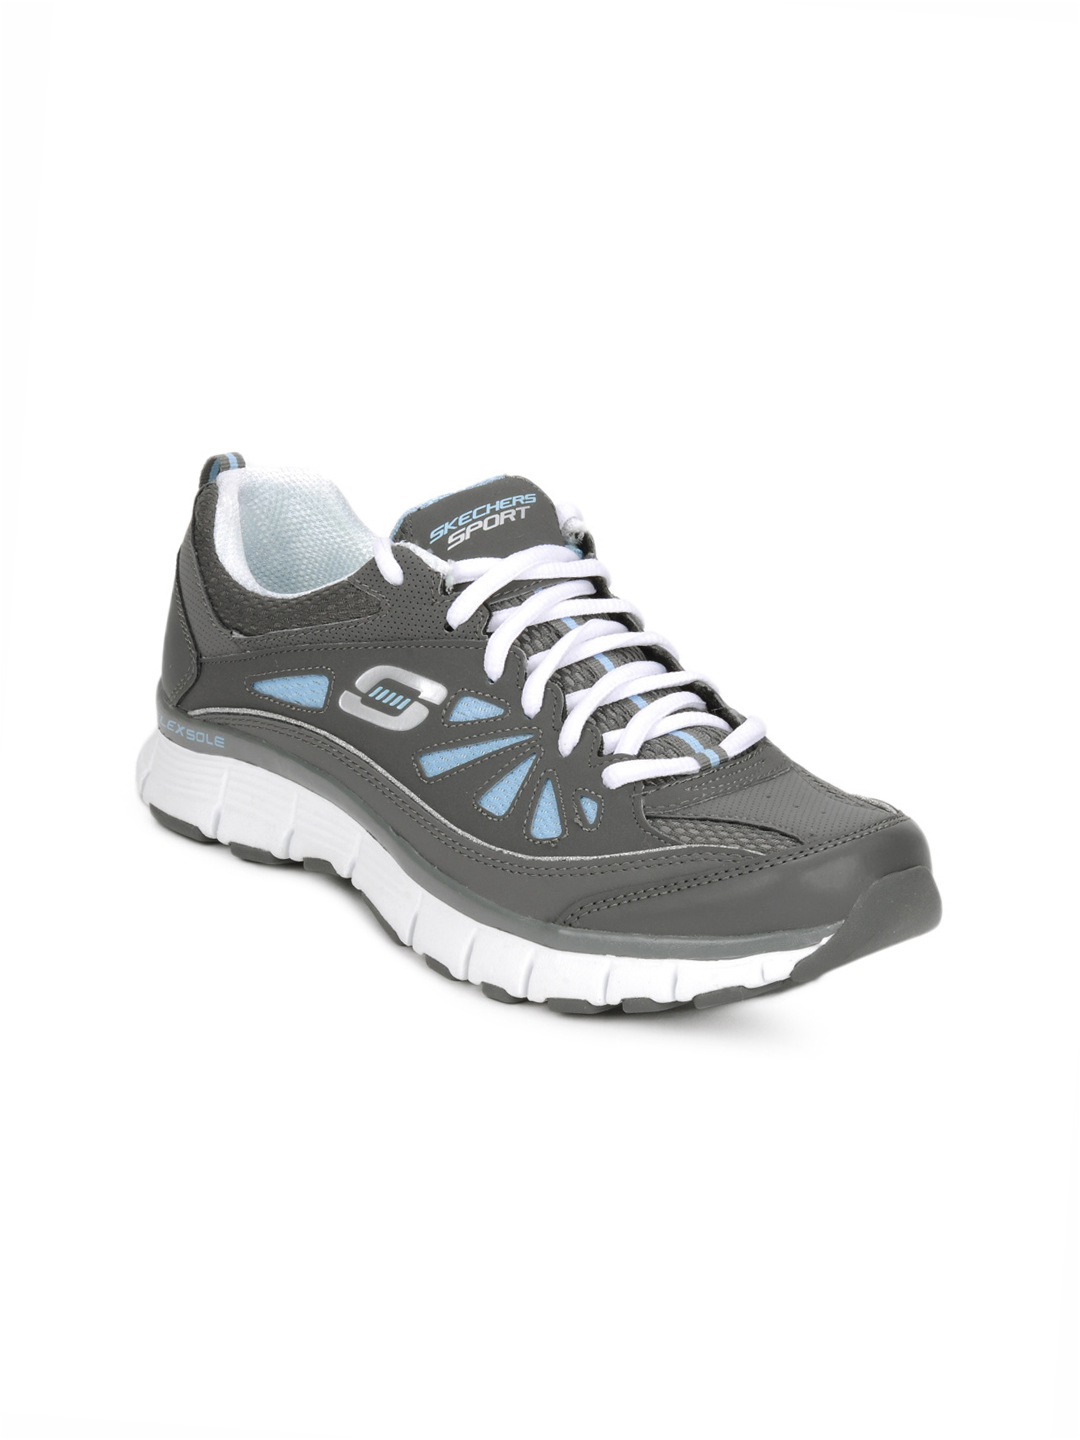 Download this Sports Shoes Efffbefafdbd Images Mini picture